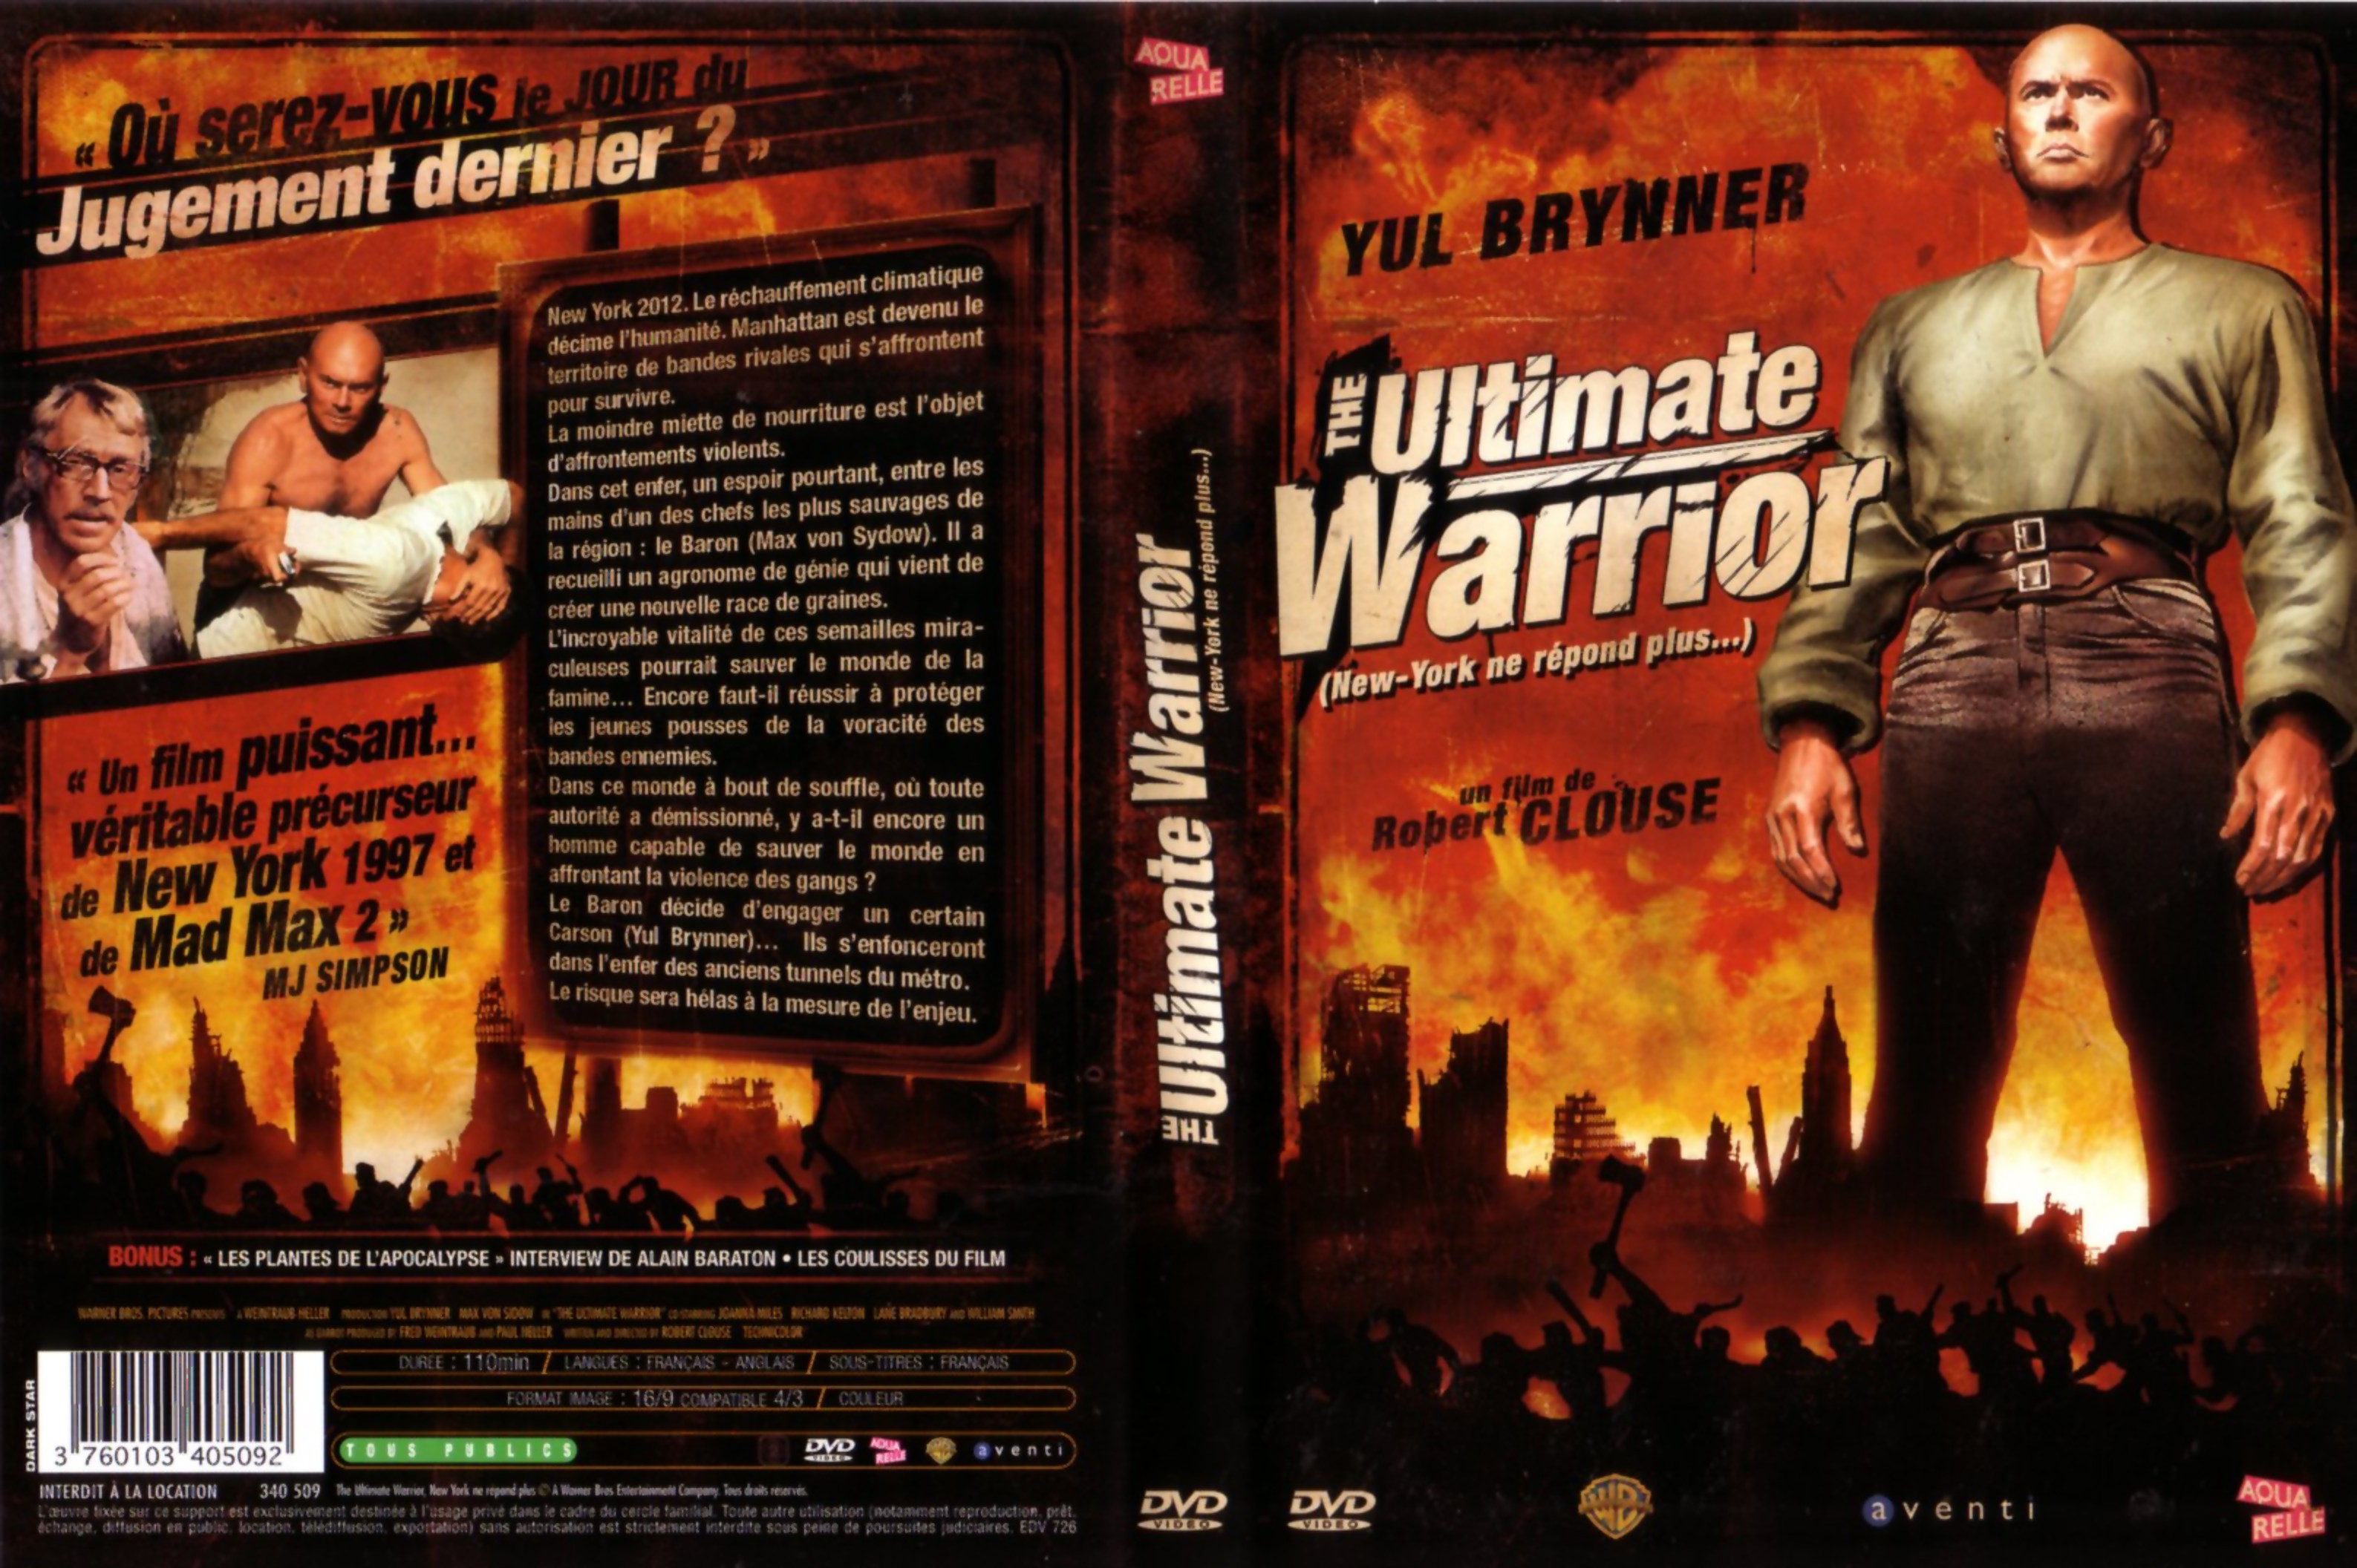 Jaquette DVD The ultimate warrior